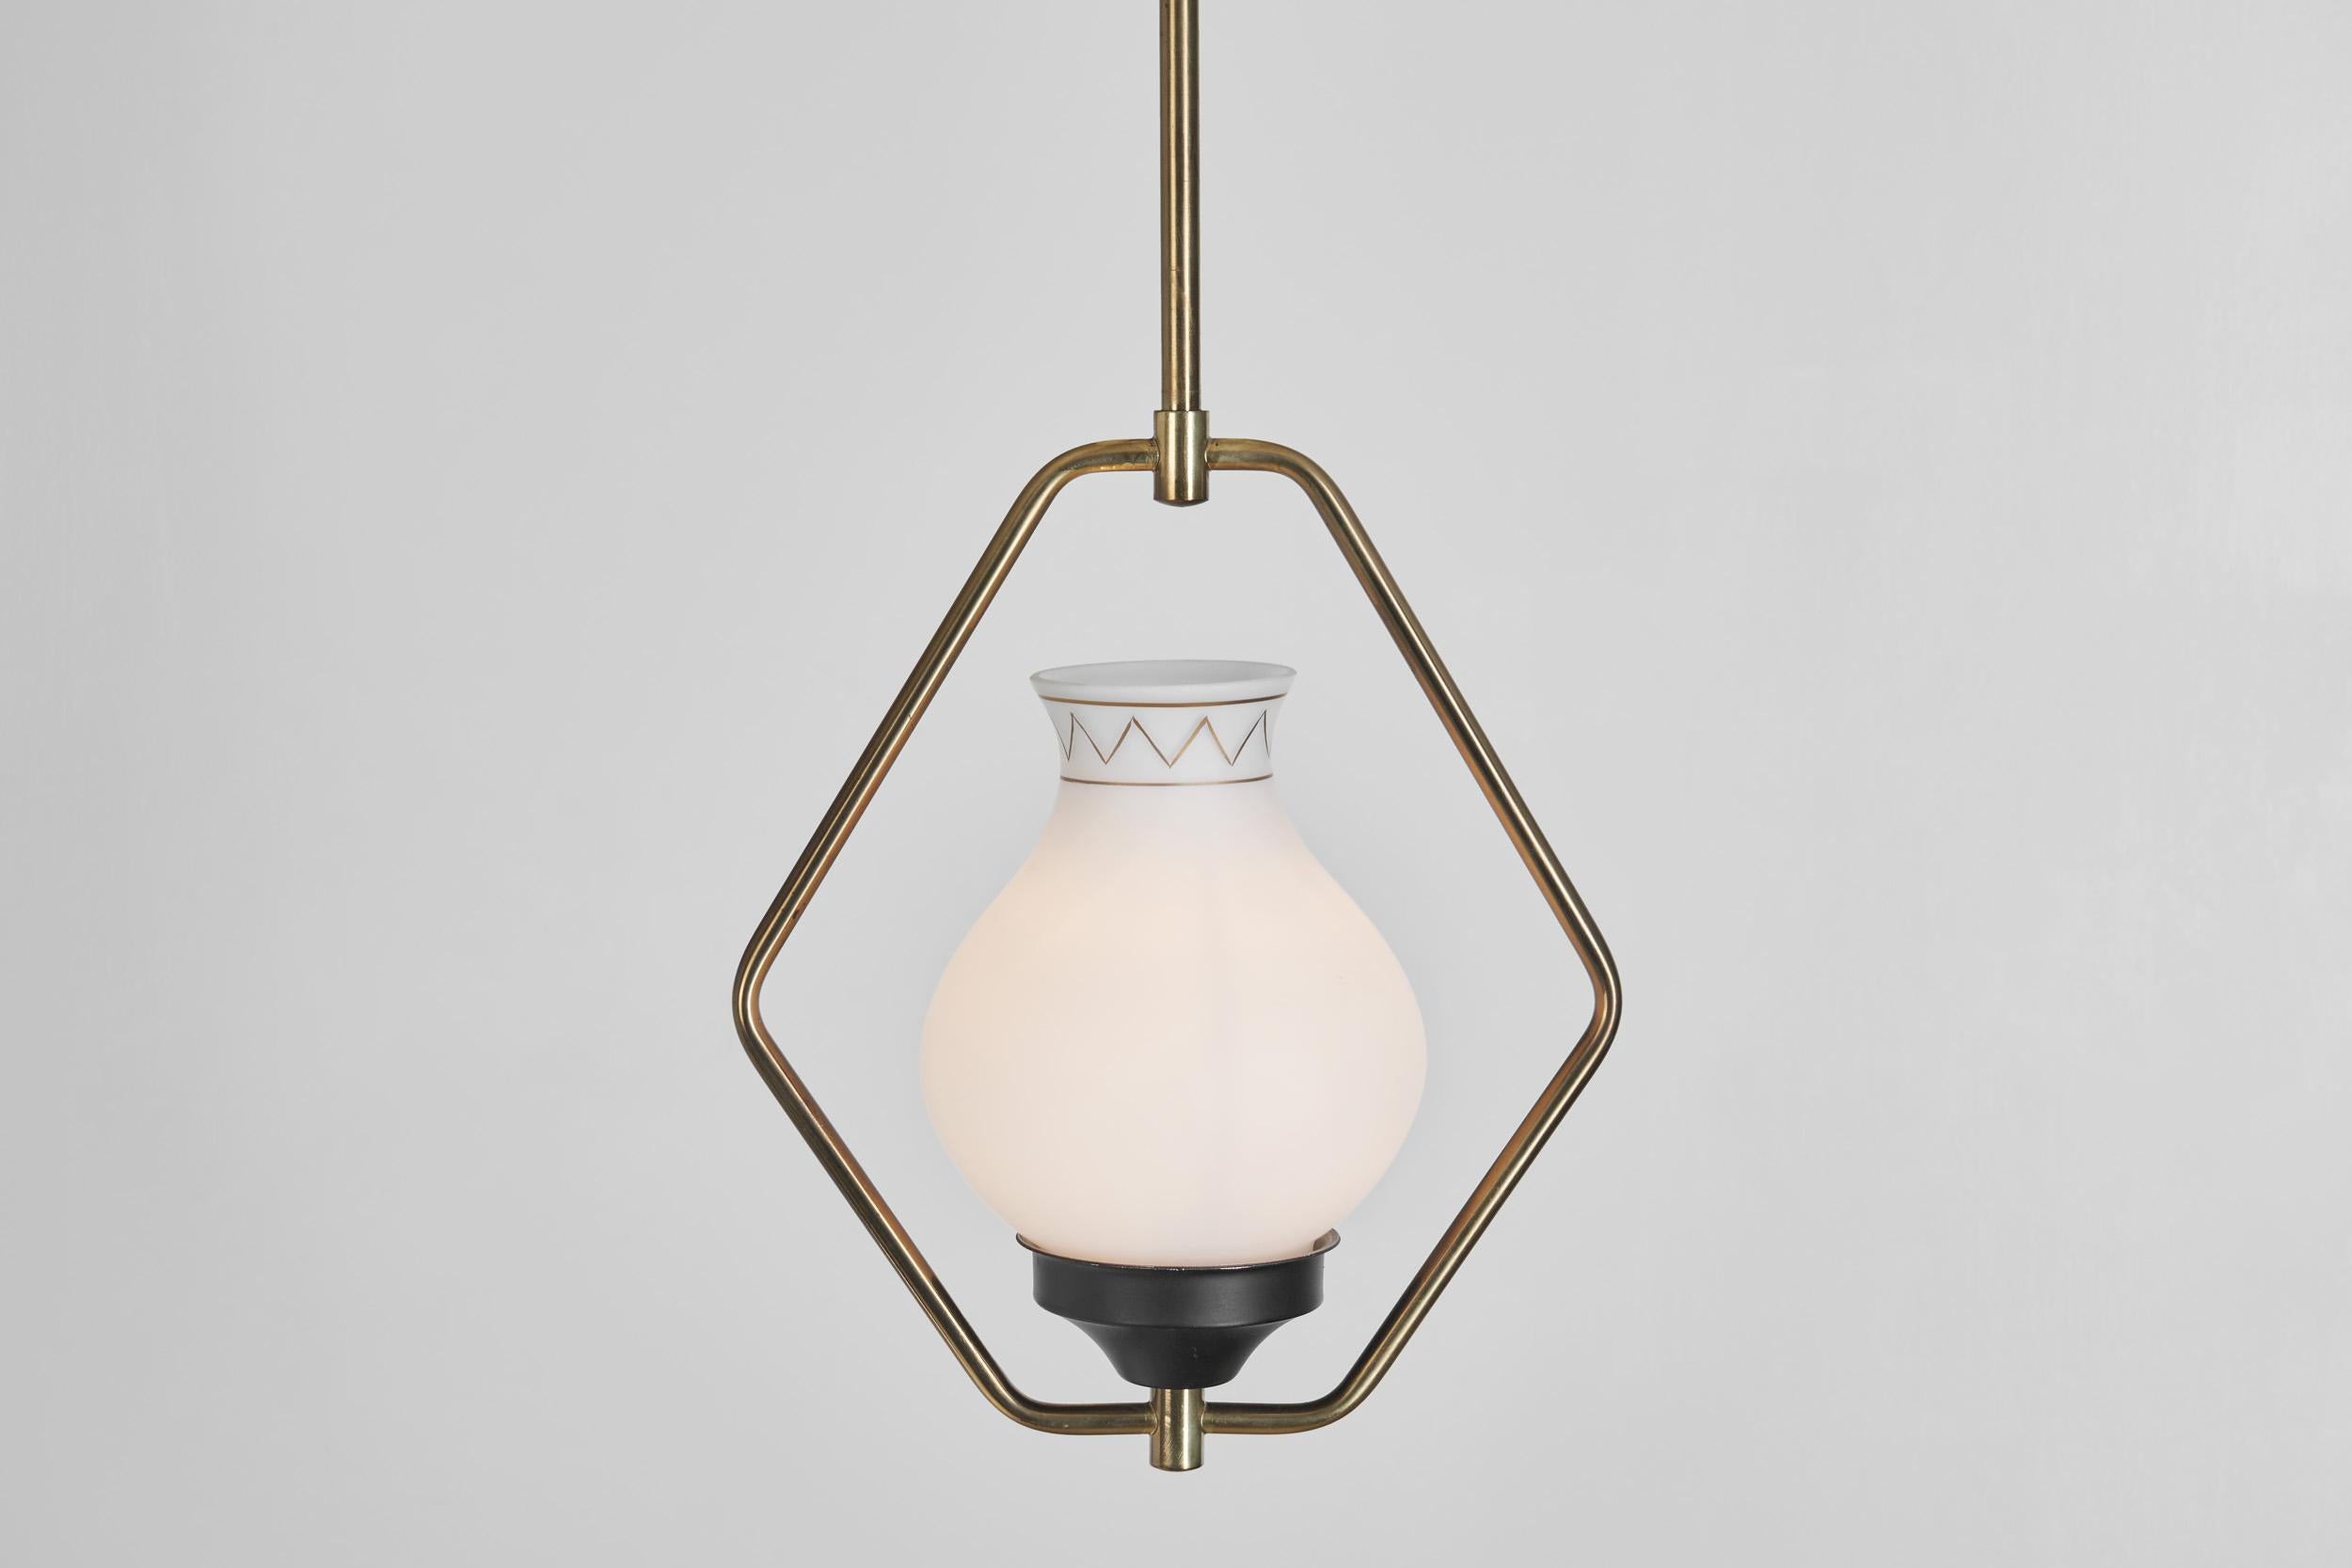 Brass and Opaque Glass Ceiling Lamp, Europe ca 1950s For Sale 2